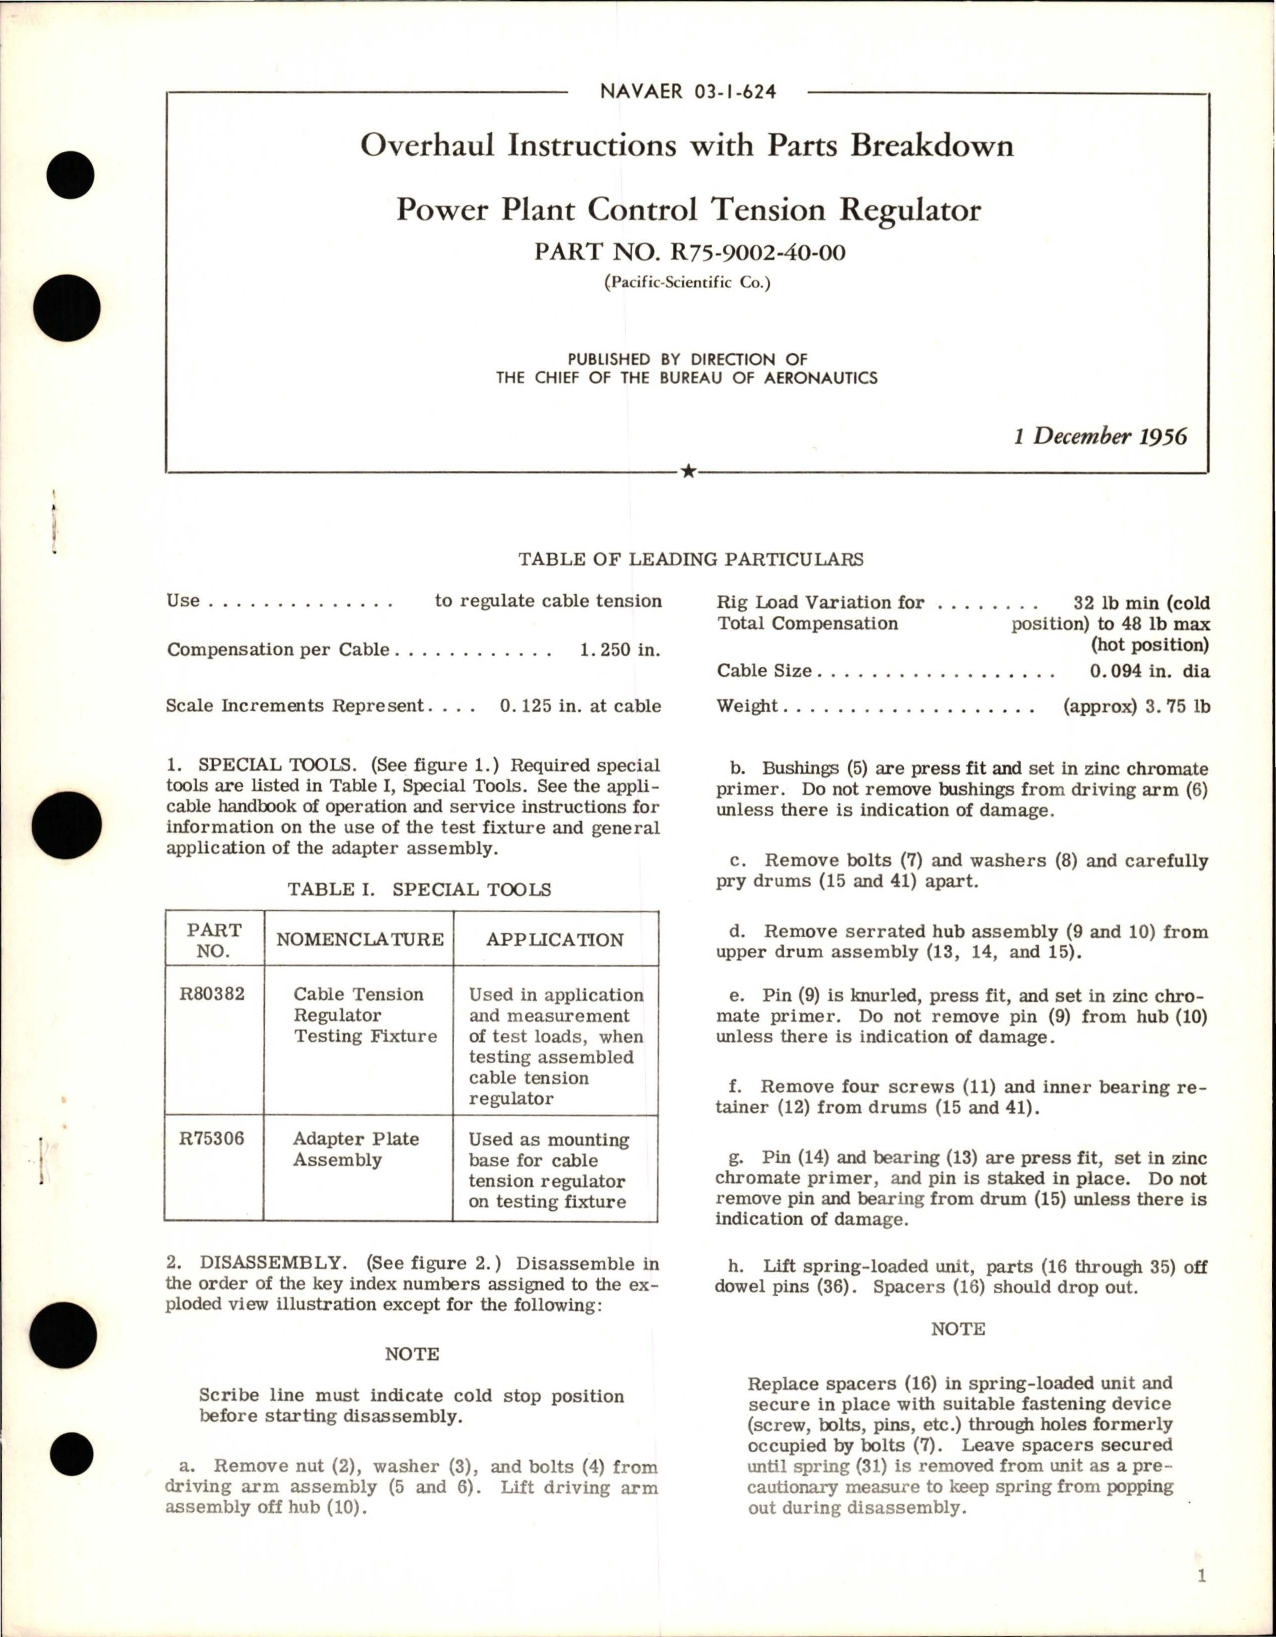 Sample page 1 from AirCorps Library document: Overhaul Instructions with Parts Breakdown for Power Plant Control Tension Regulator - Part R75-9002-40-00